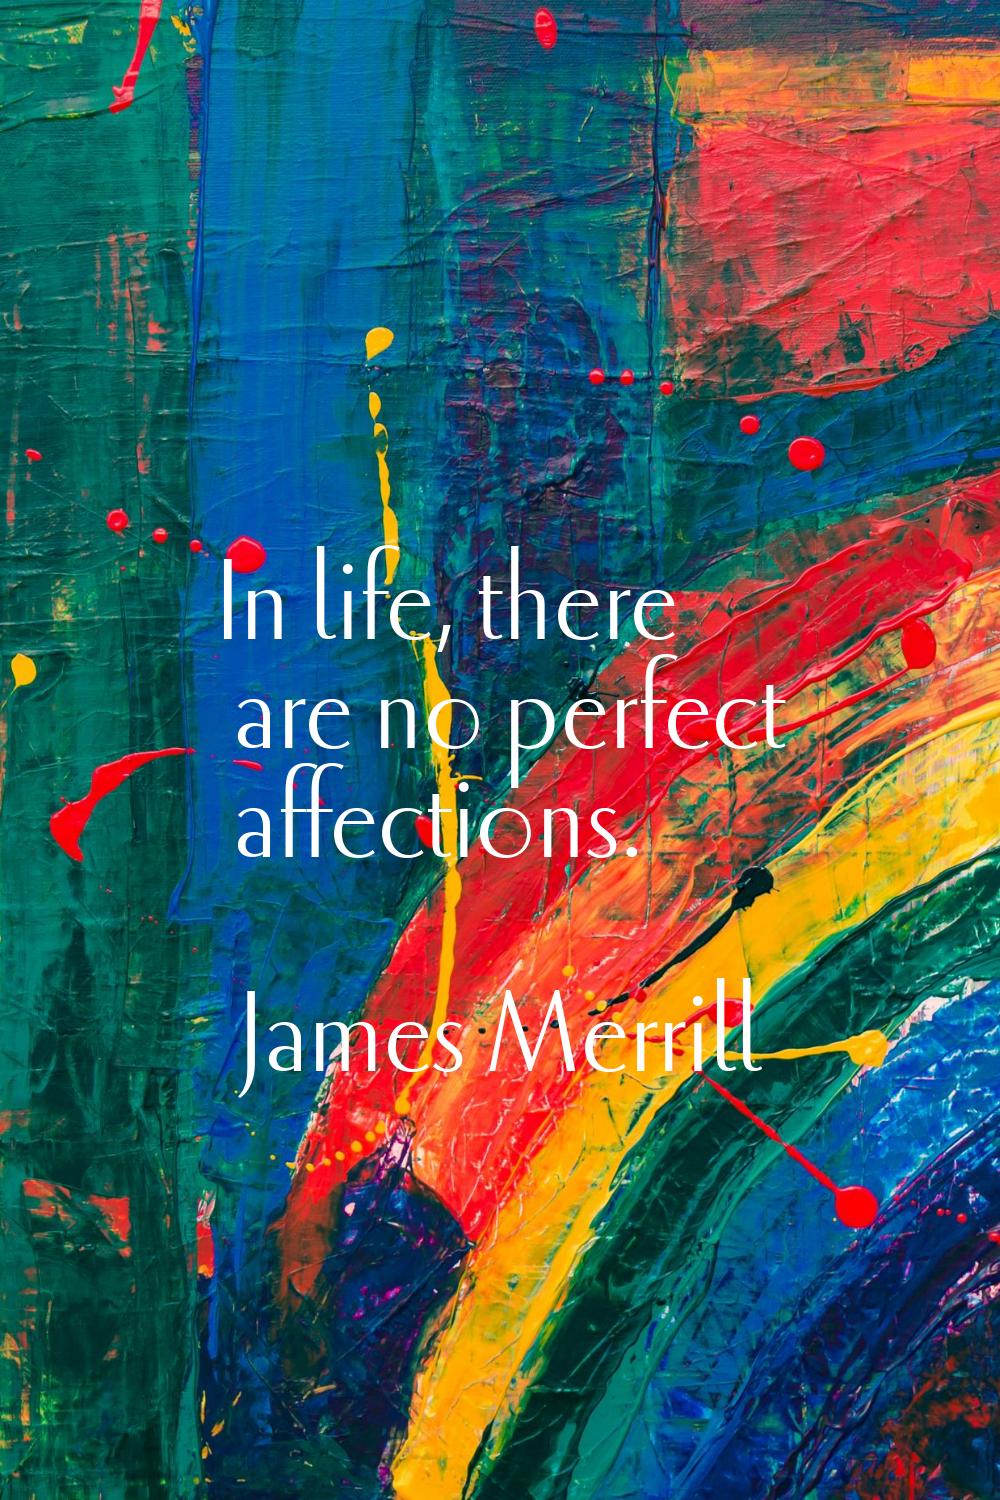 In life, there are no perfect affections.